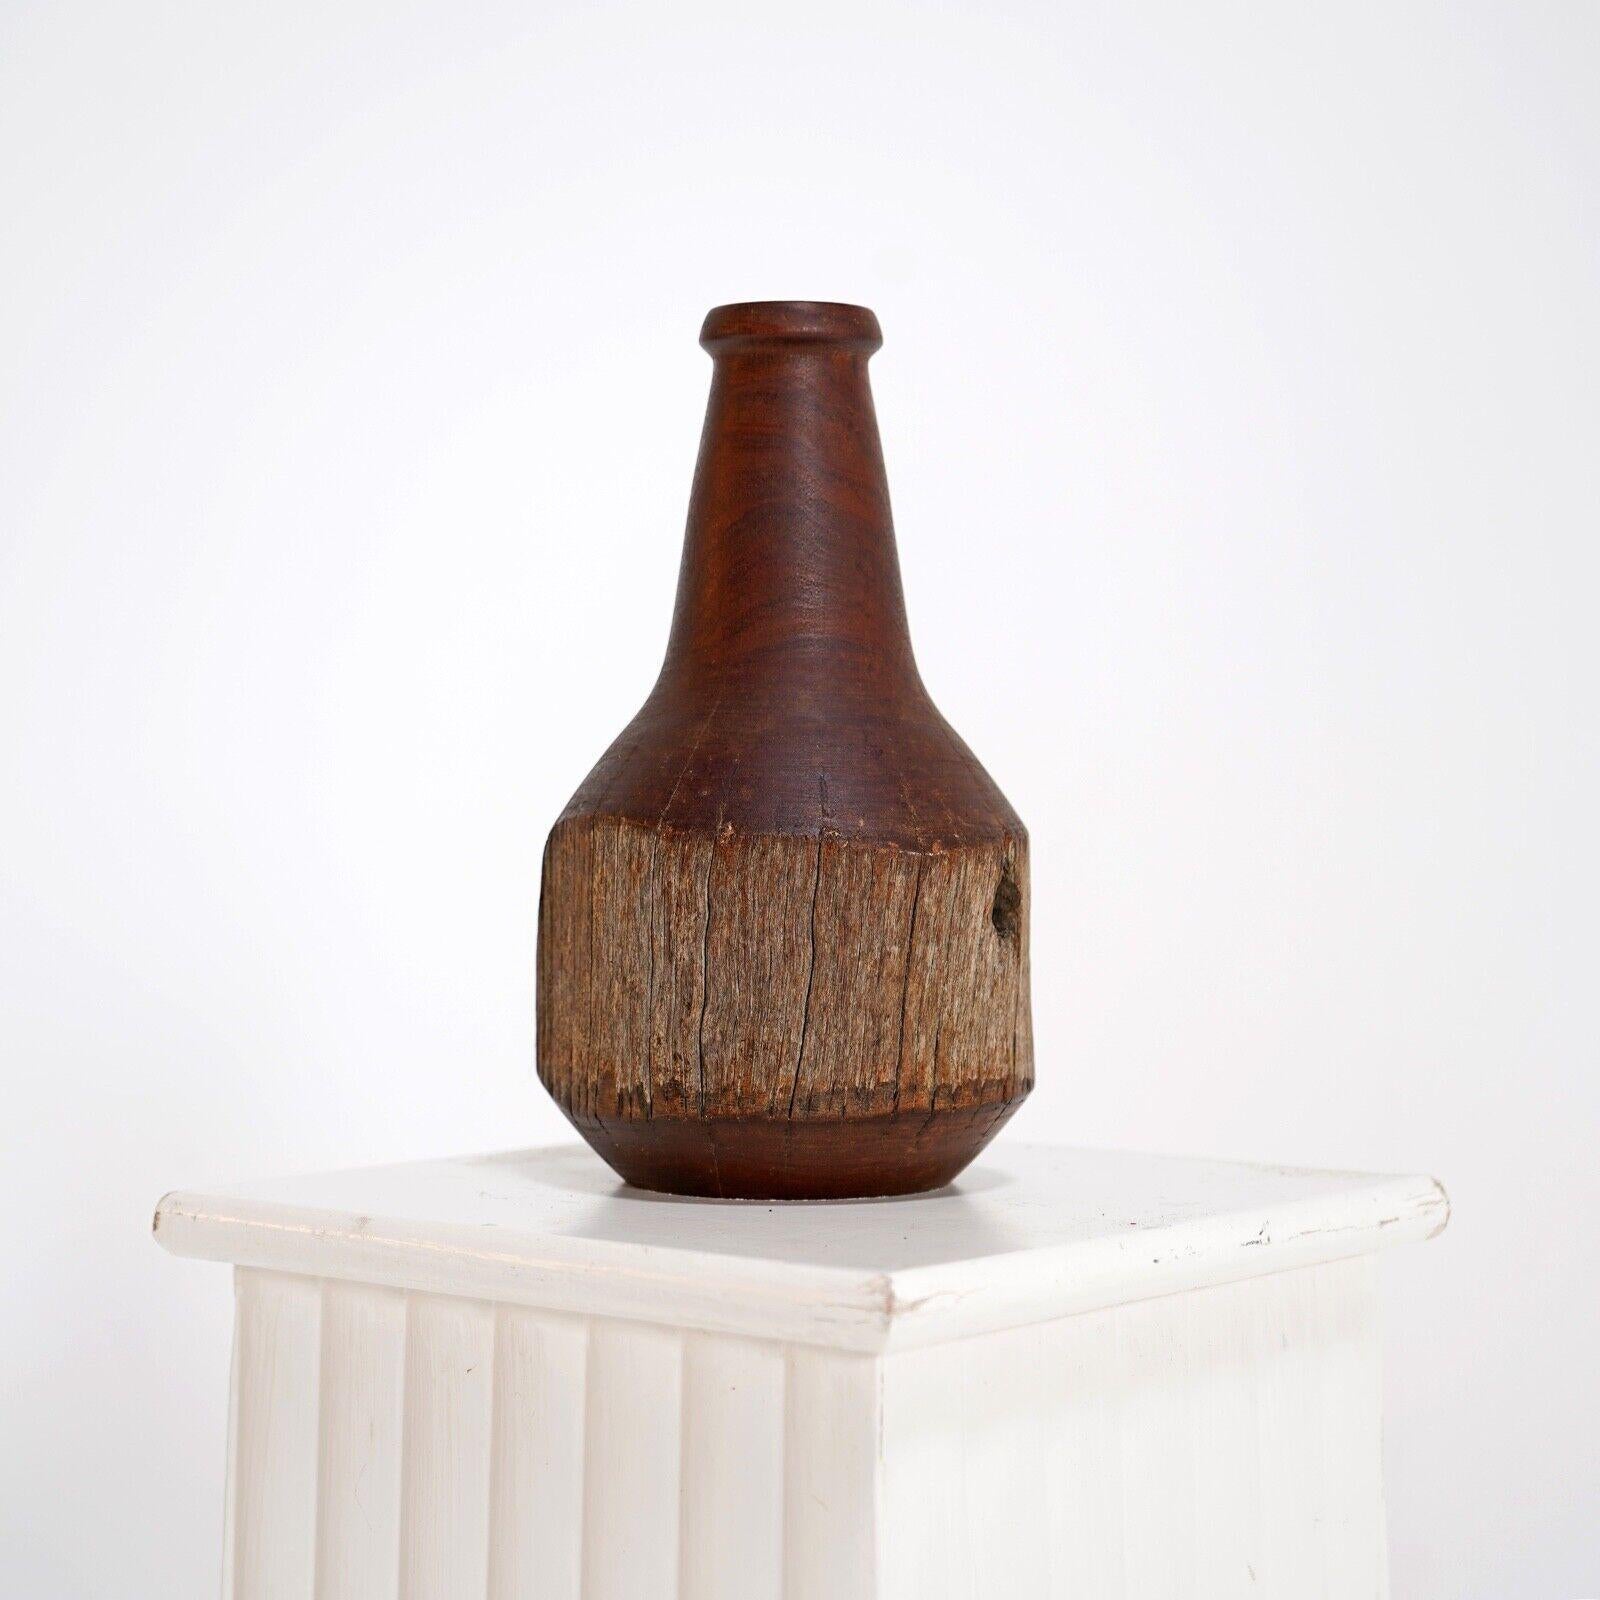 Turned Wooden Sculpture of a Bottle In Good Condition For Sale In Dorchester, GB